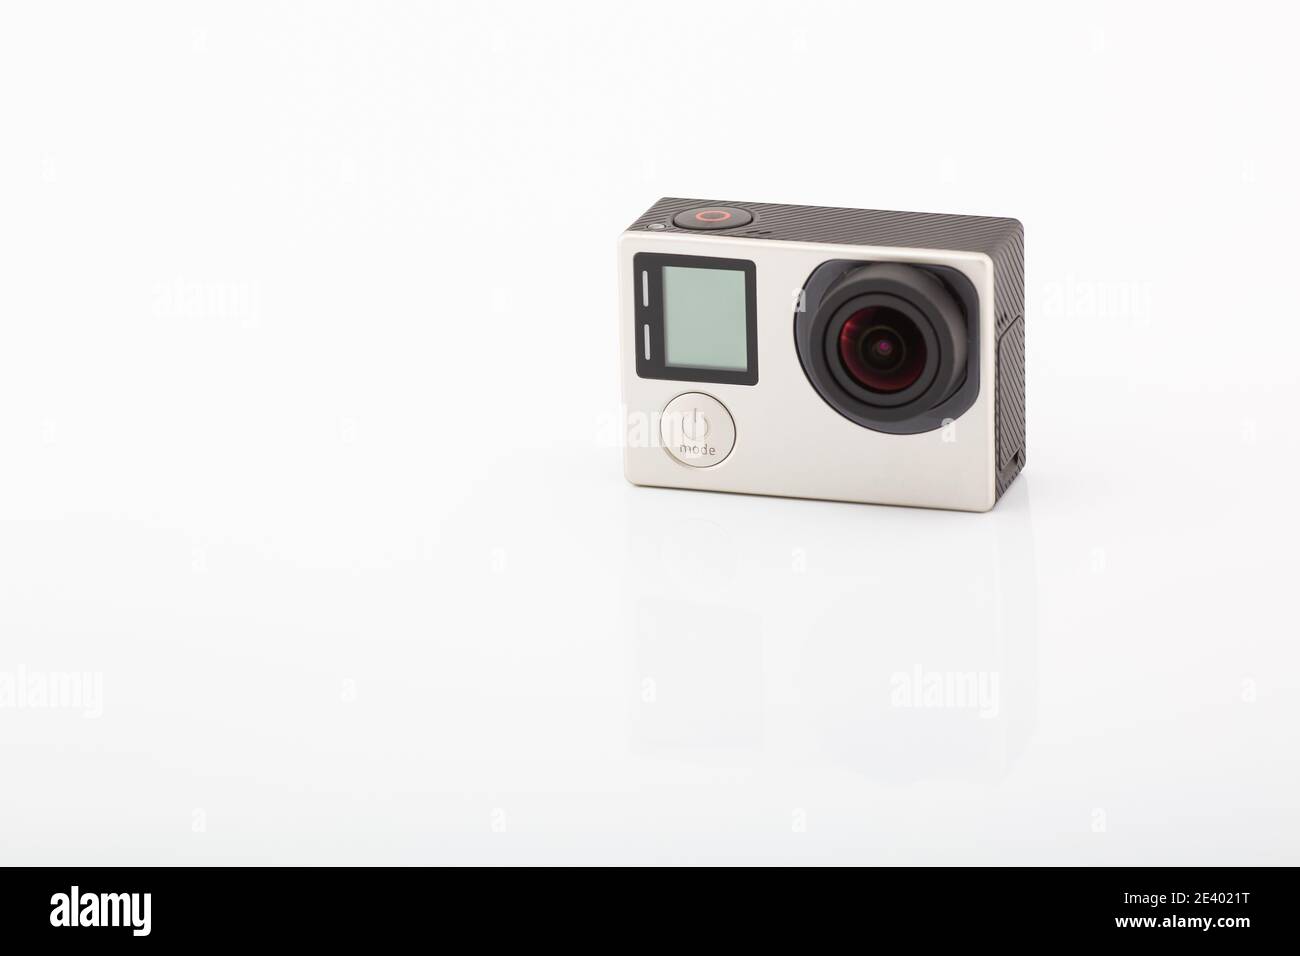 Action Camera Isolated on White Background. High-definition personal camera. Stock Photo